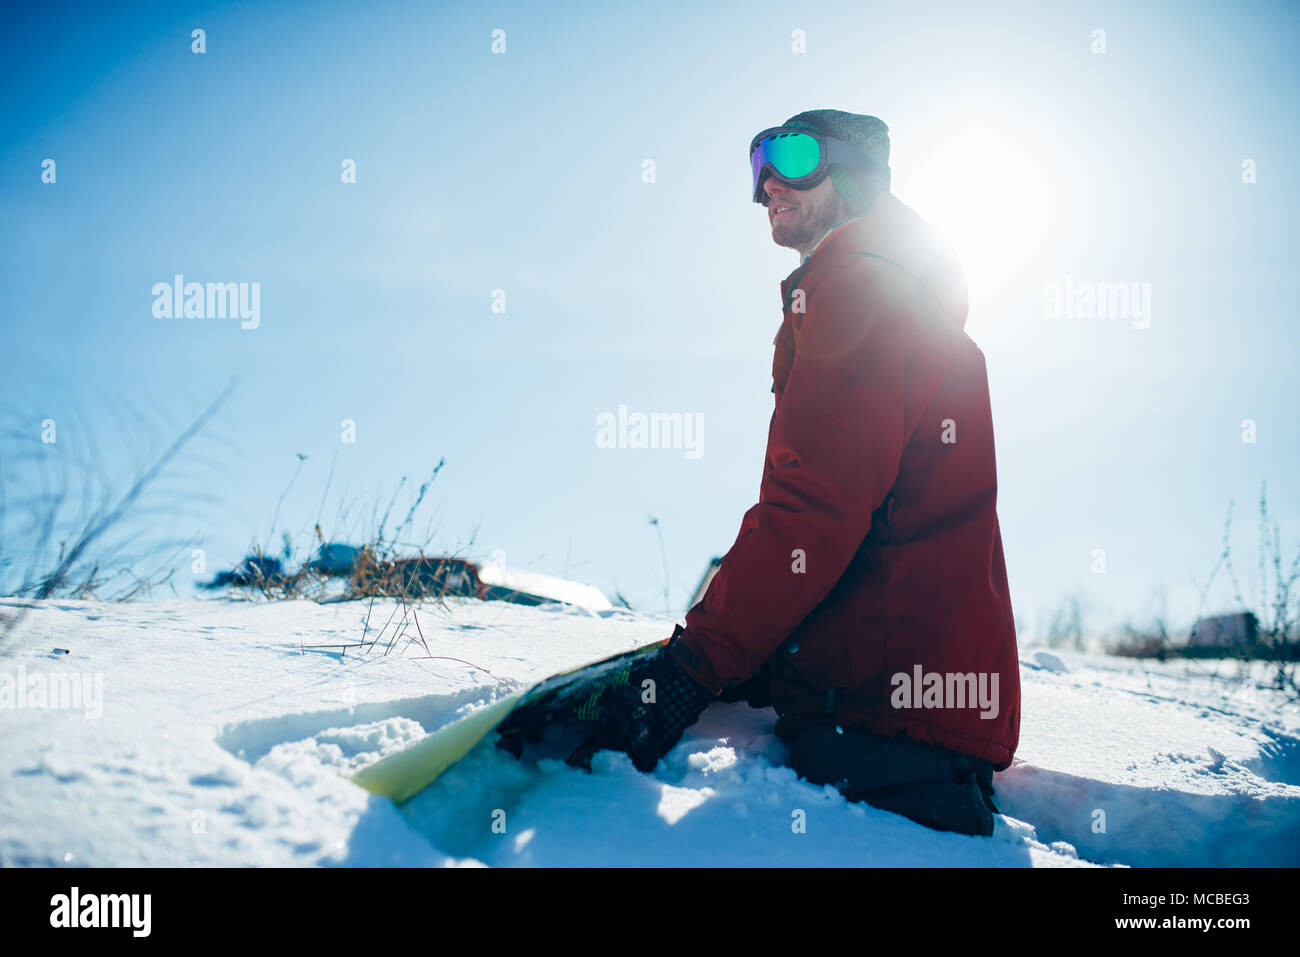 Snowboarder sitting on snowy slope in sunny day Stock Photo